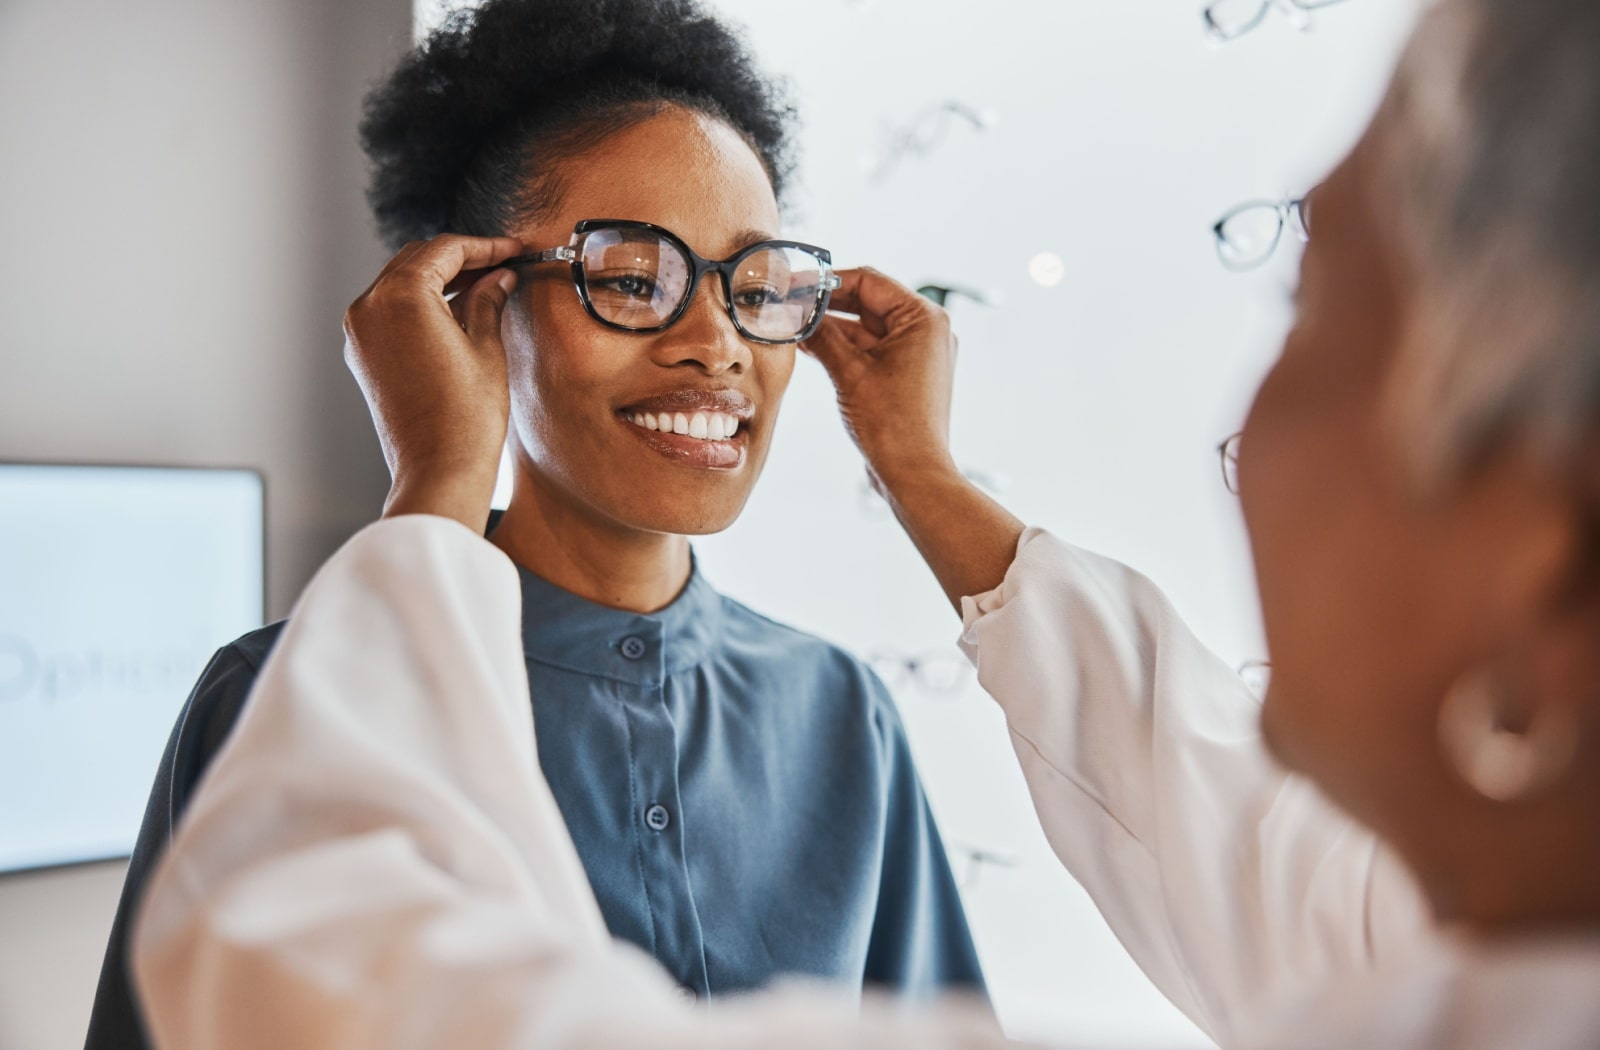 An optometrist adjusts a female patient's glasses on her head